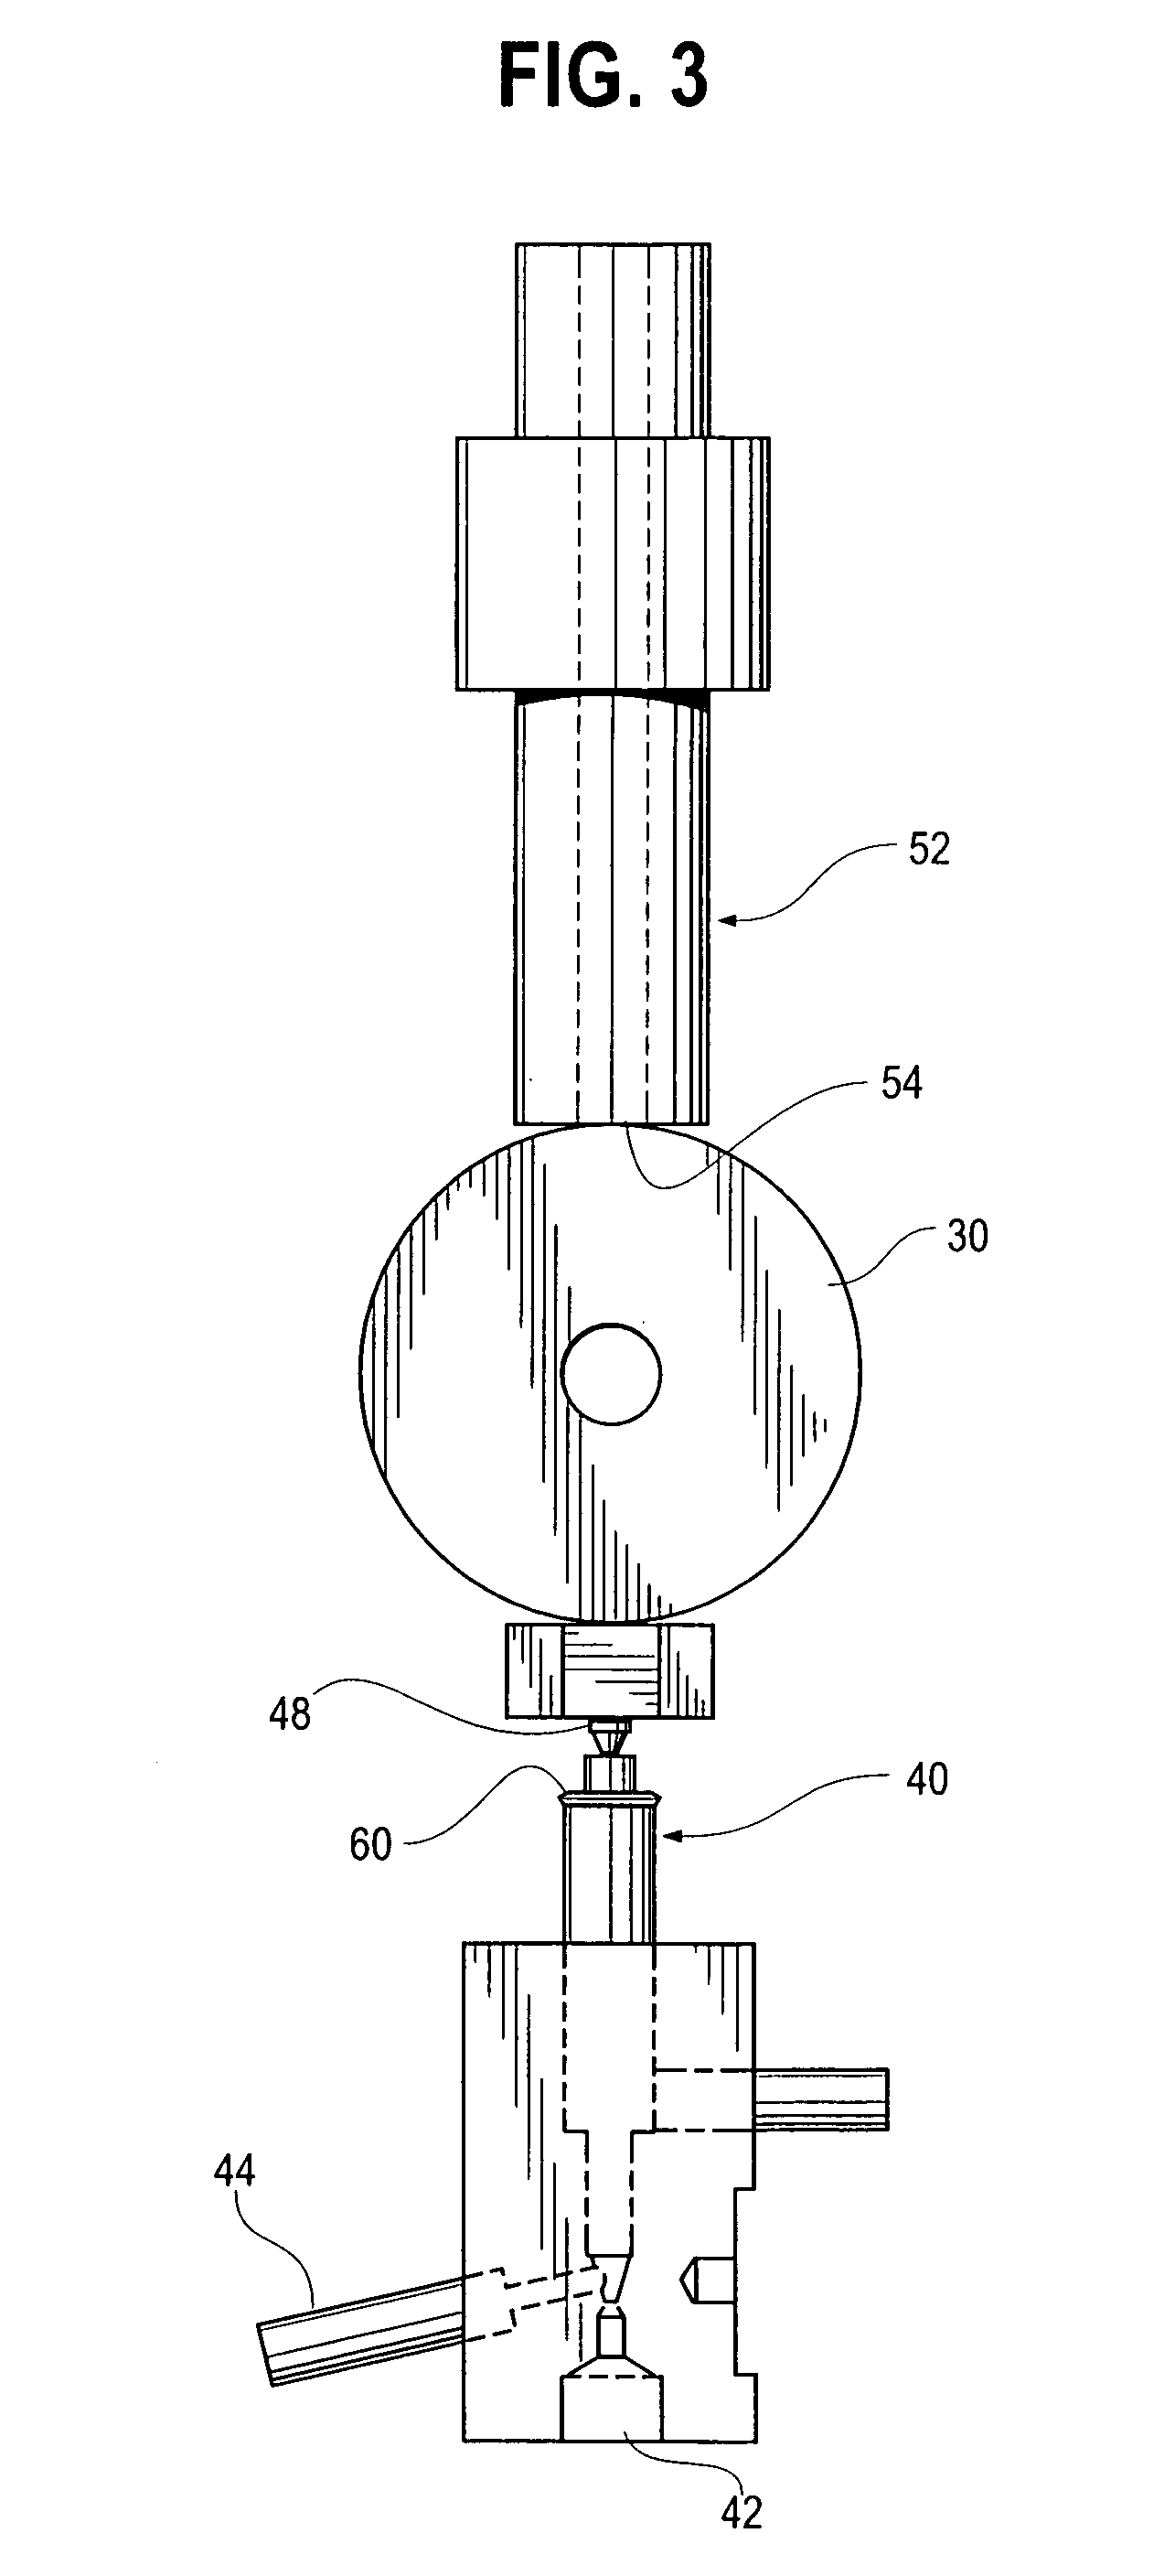 Process and apparatus for the application of fluoropolymer coating to threaded fasteners